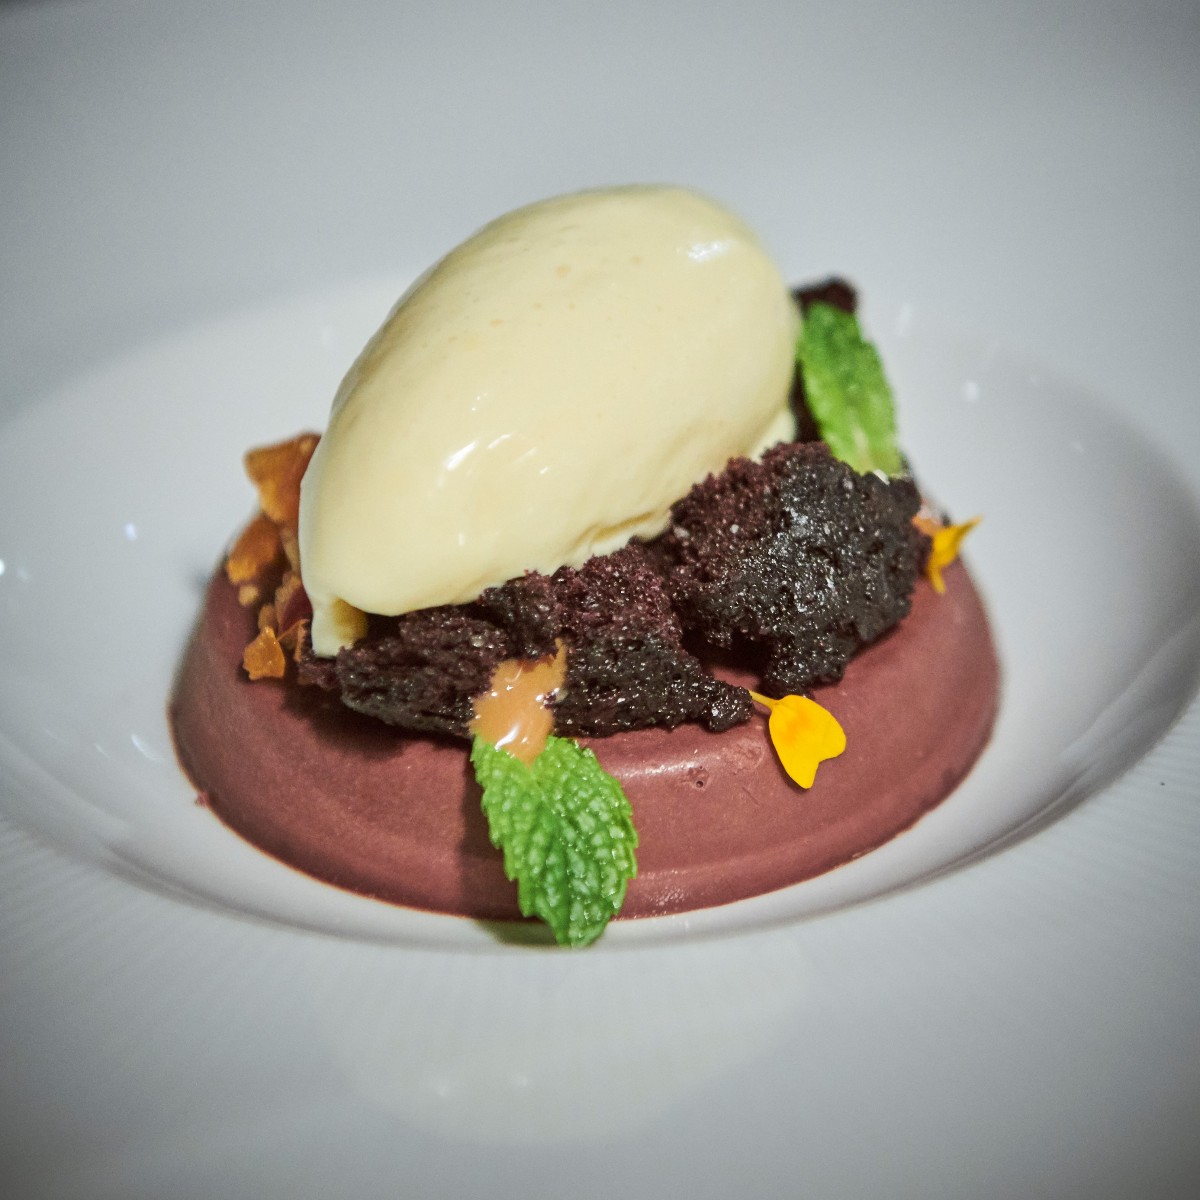 Fluffy chocolate cake crumbles, smooth passionfruit ice cream, and a crunchy cashew croquant – what more could you ask for? Complete your meal with this delicious @comperelapin dessert! 📸: Chocolate Ganache #GourmetFood #Cuisine #FineDining